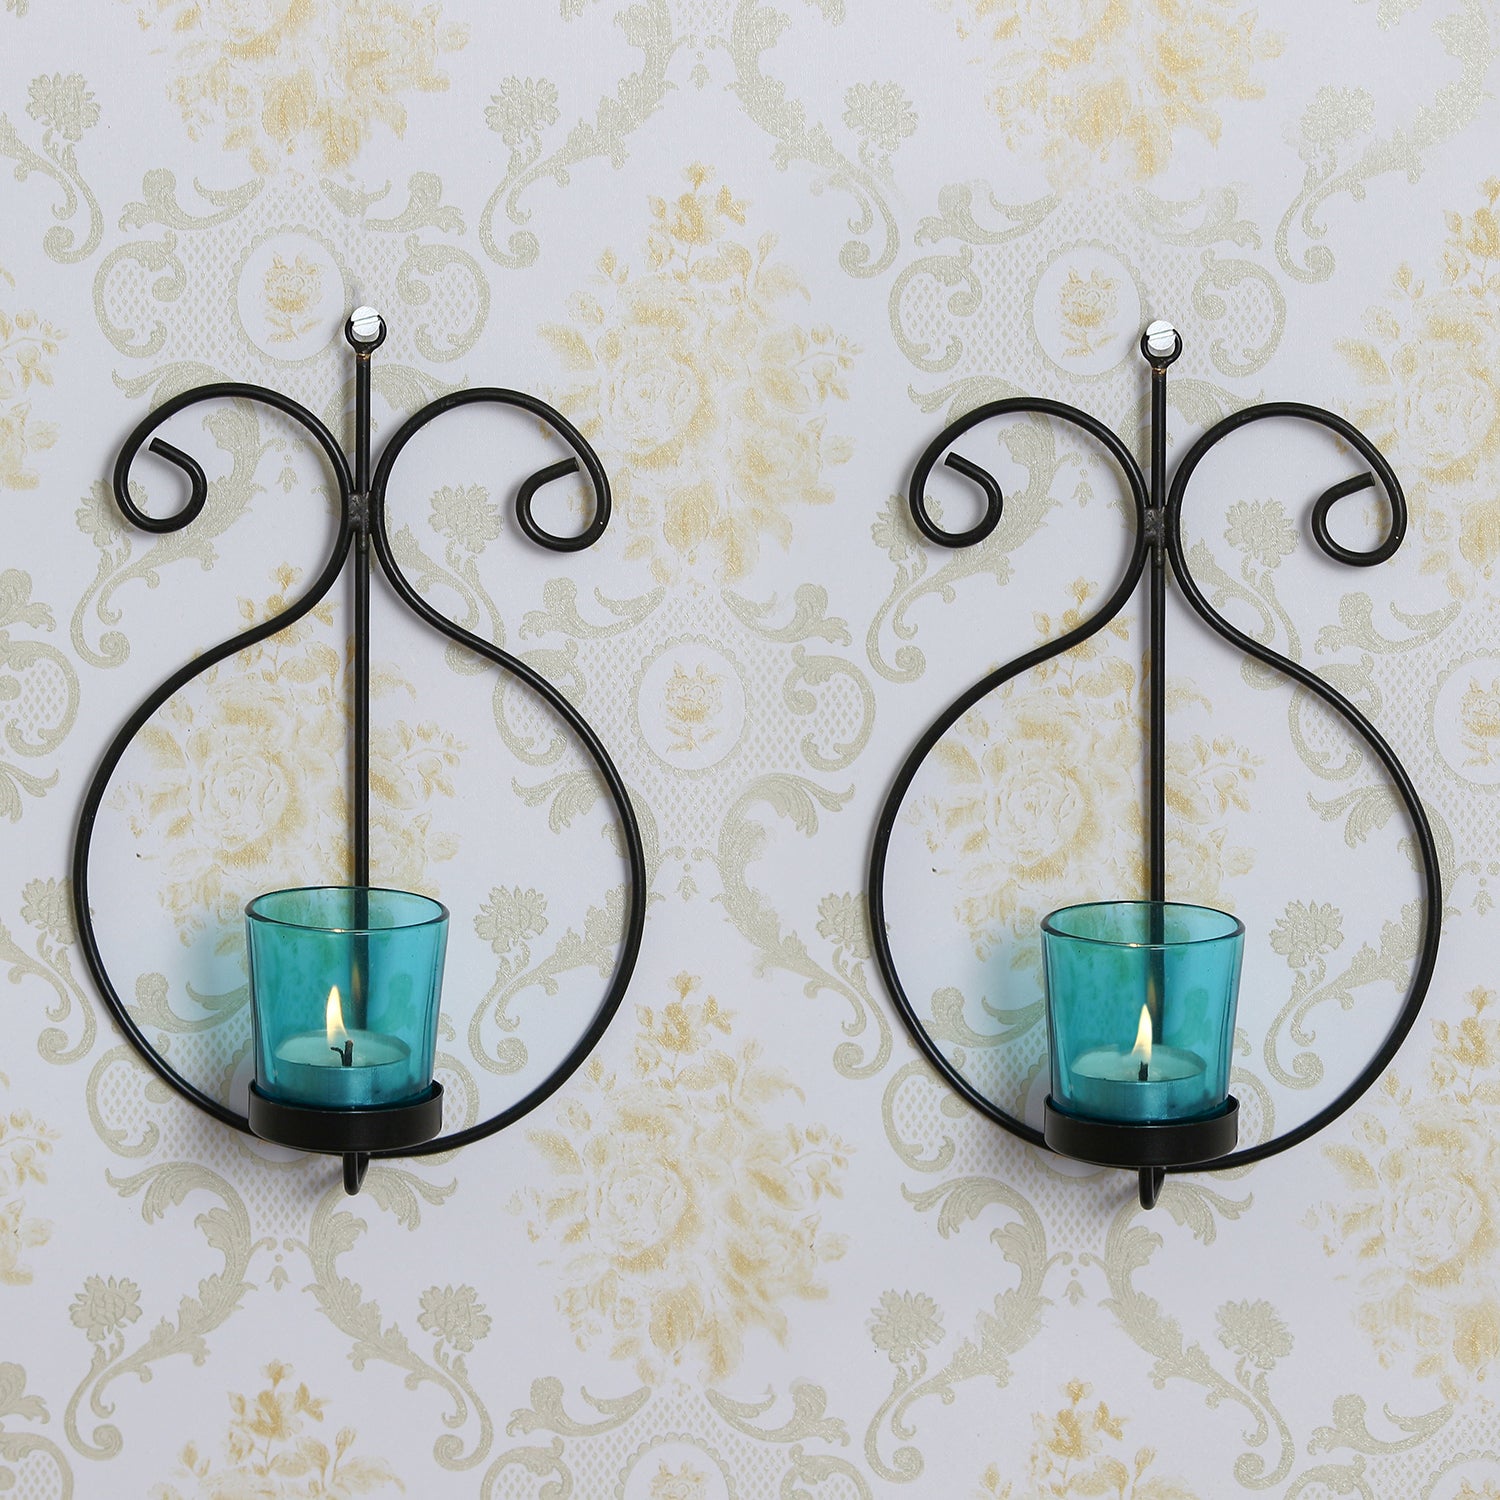 2 Blue Glass Cup Black Tea Light Candle Holder with Wall Sconce